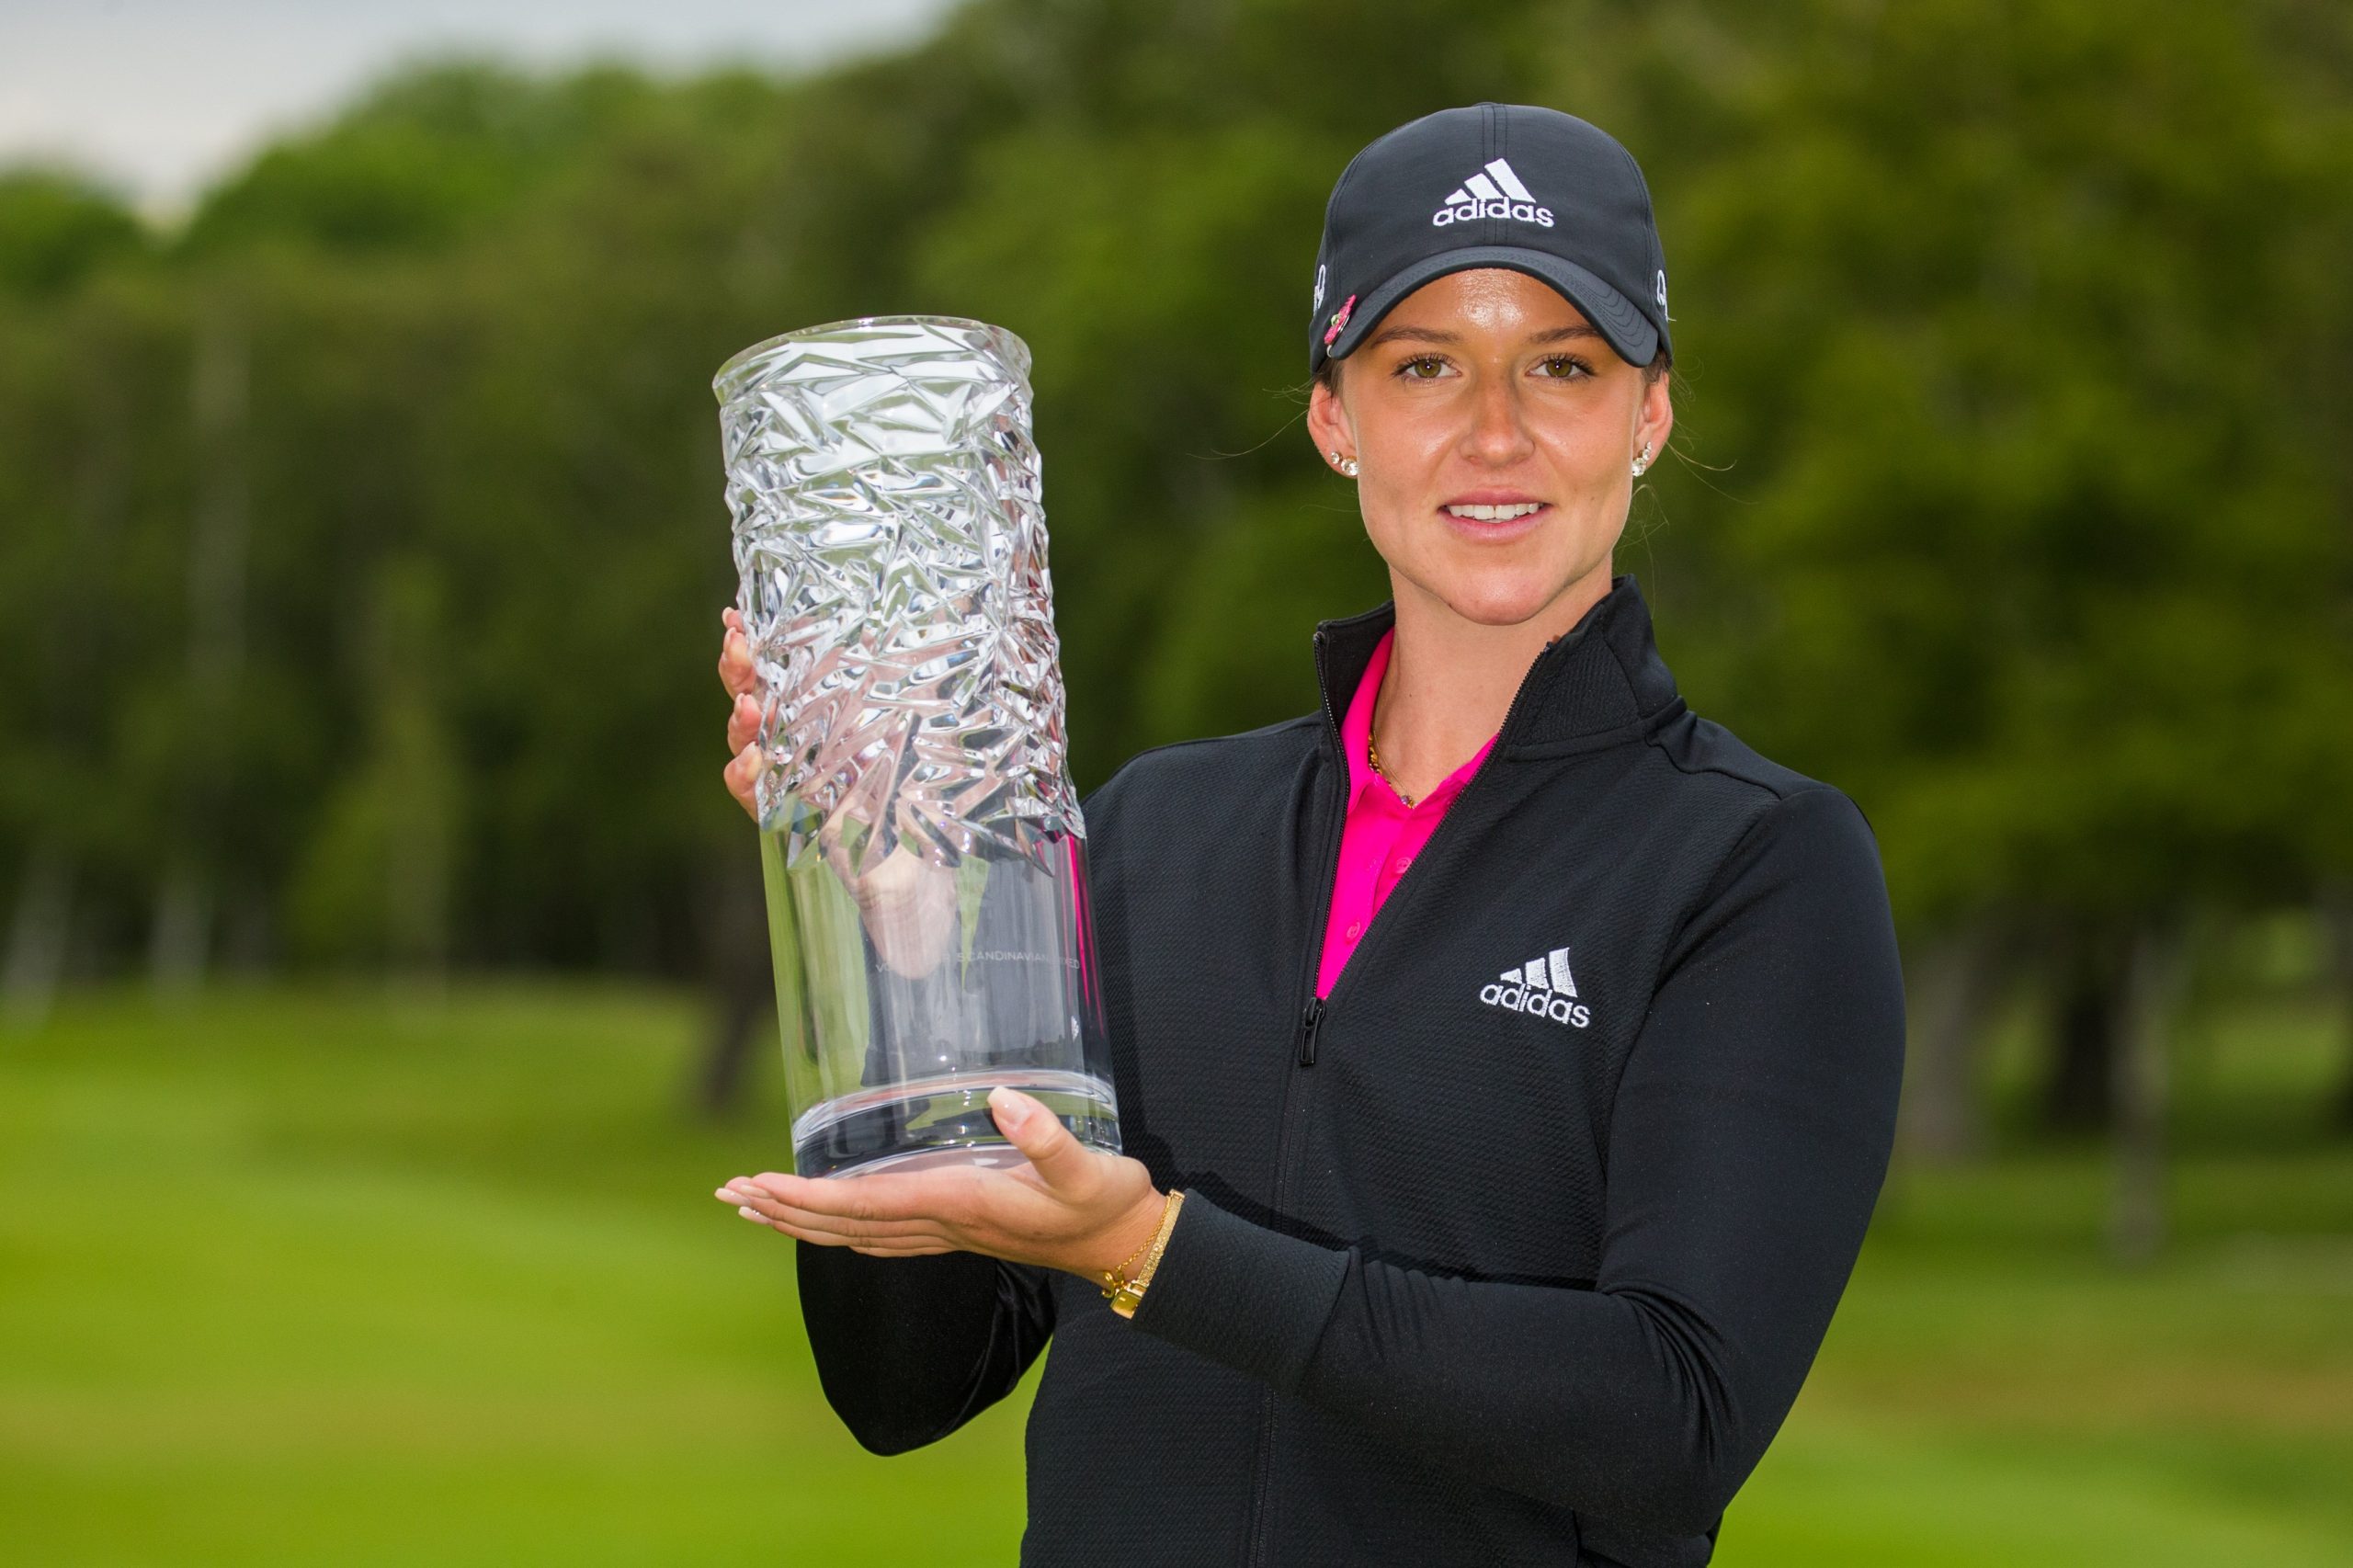 Sweden’s Linn Grant scripts a milestone in golf, beats men to win Mixed event; host Stenson is second.